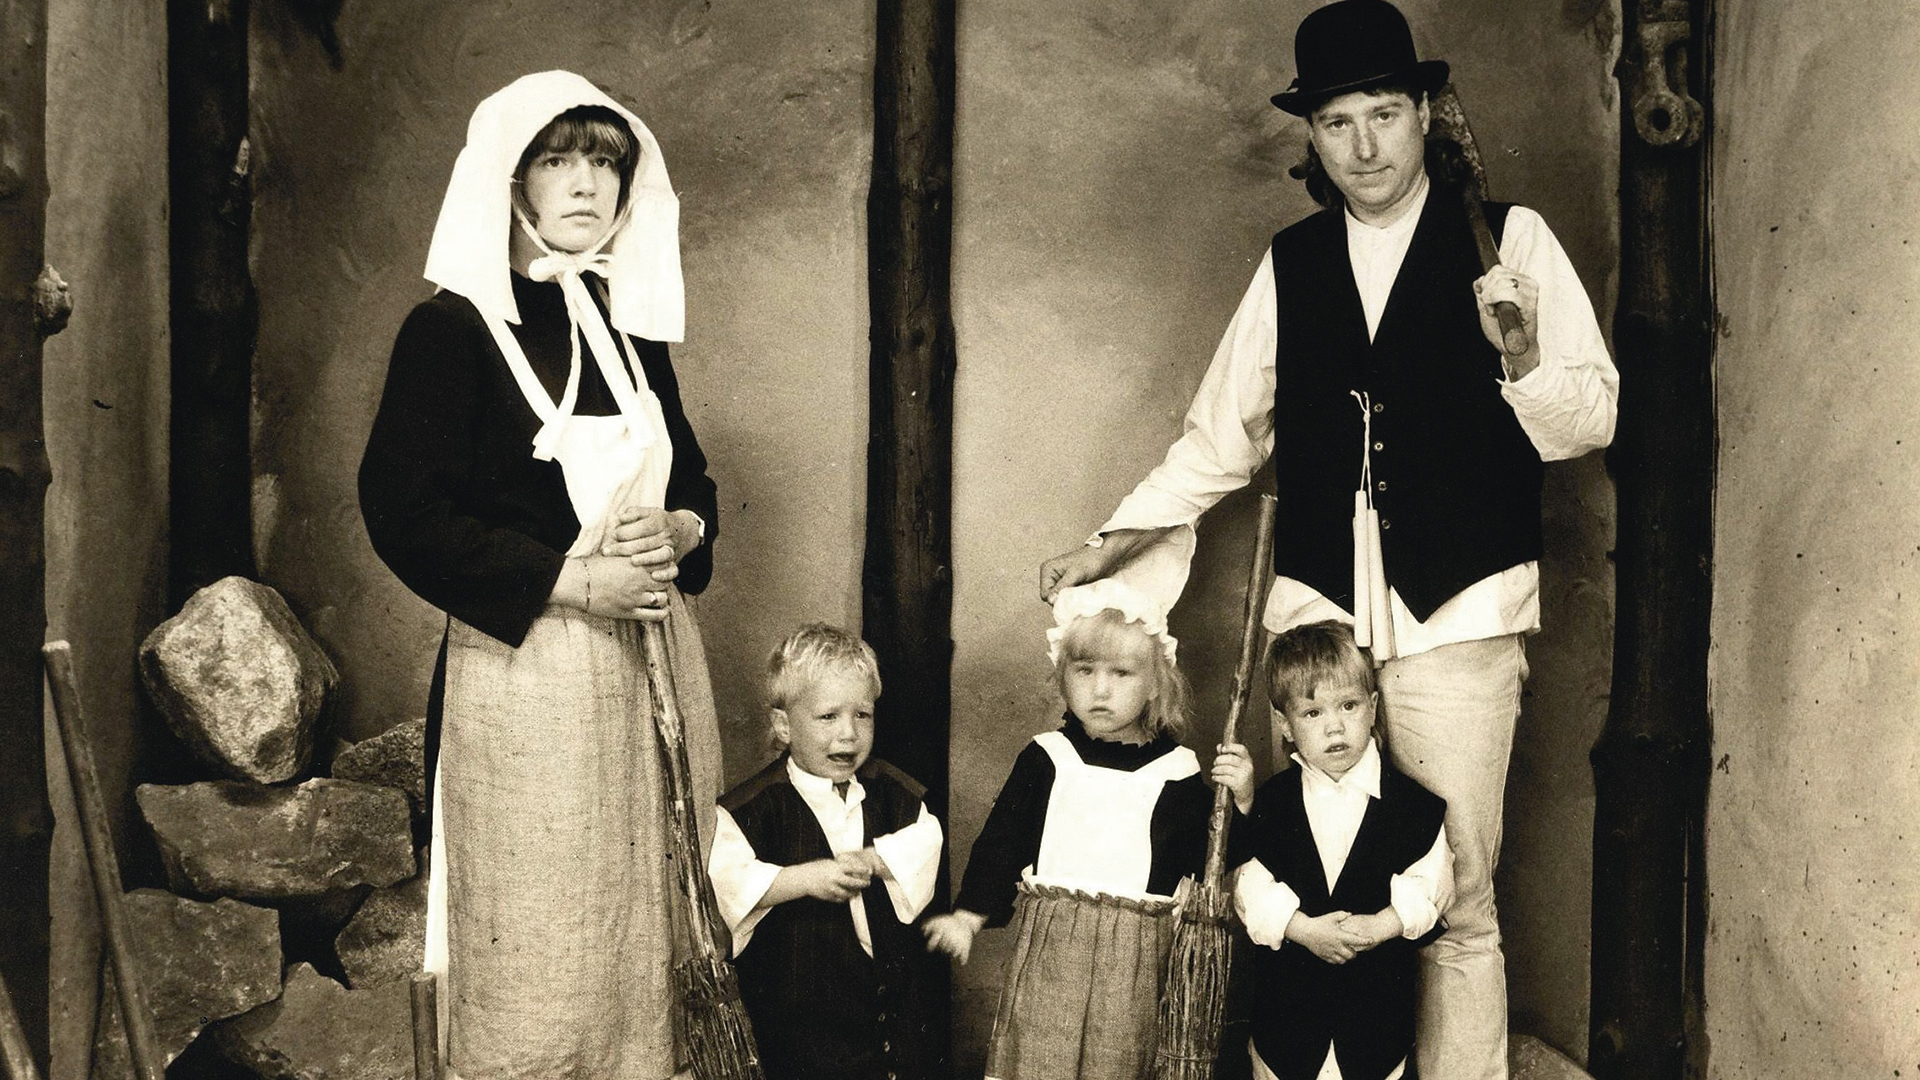 Olly Murs with his family at a Victorian-themed photo shoot in 1986